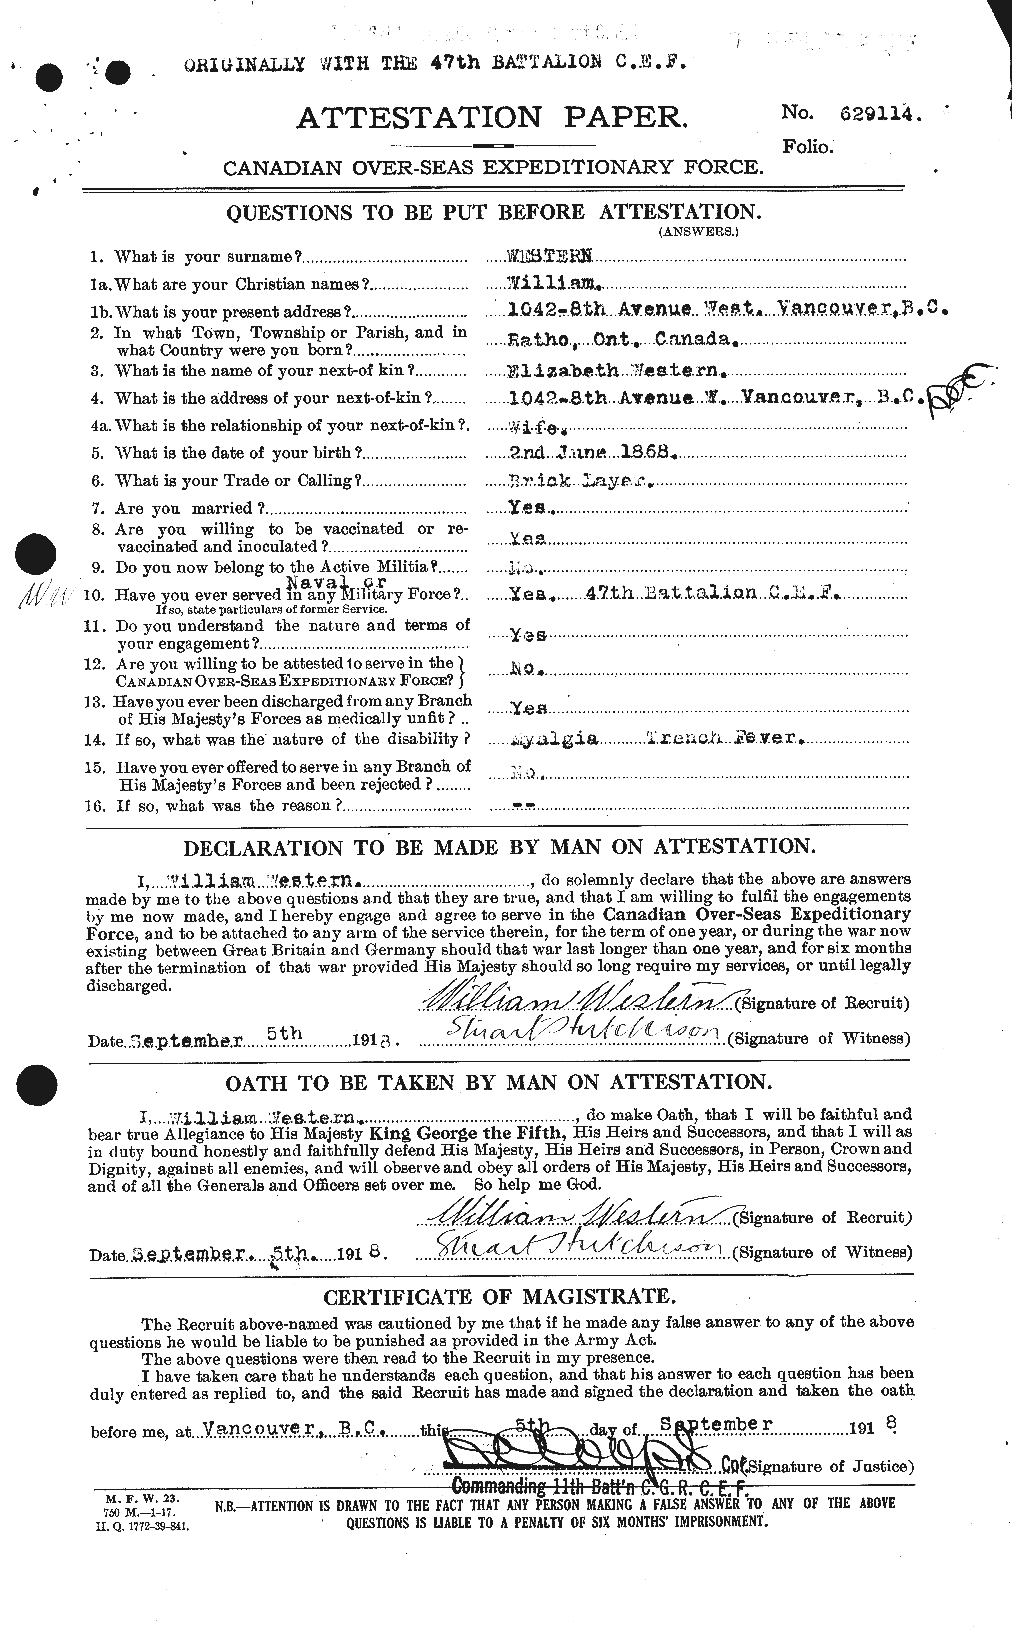 Personnel Records of the First World War - CEF 668180a